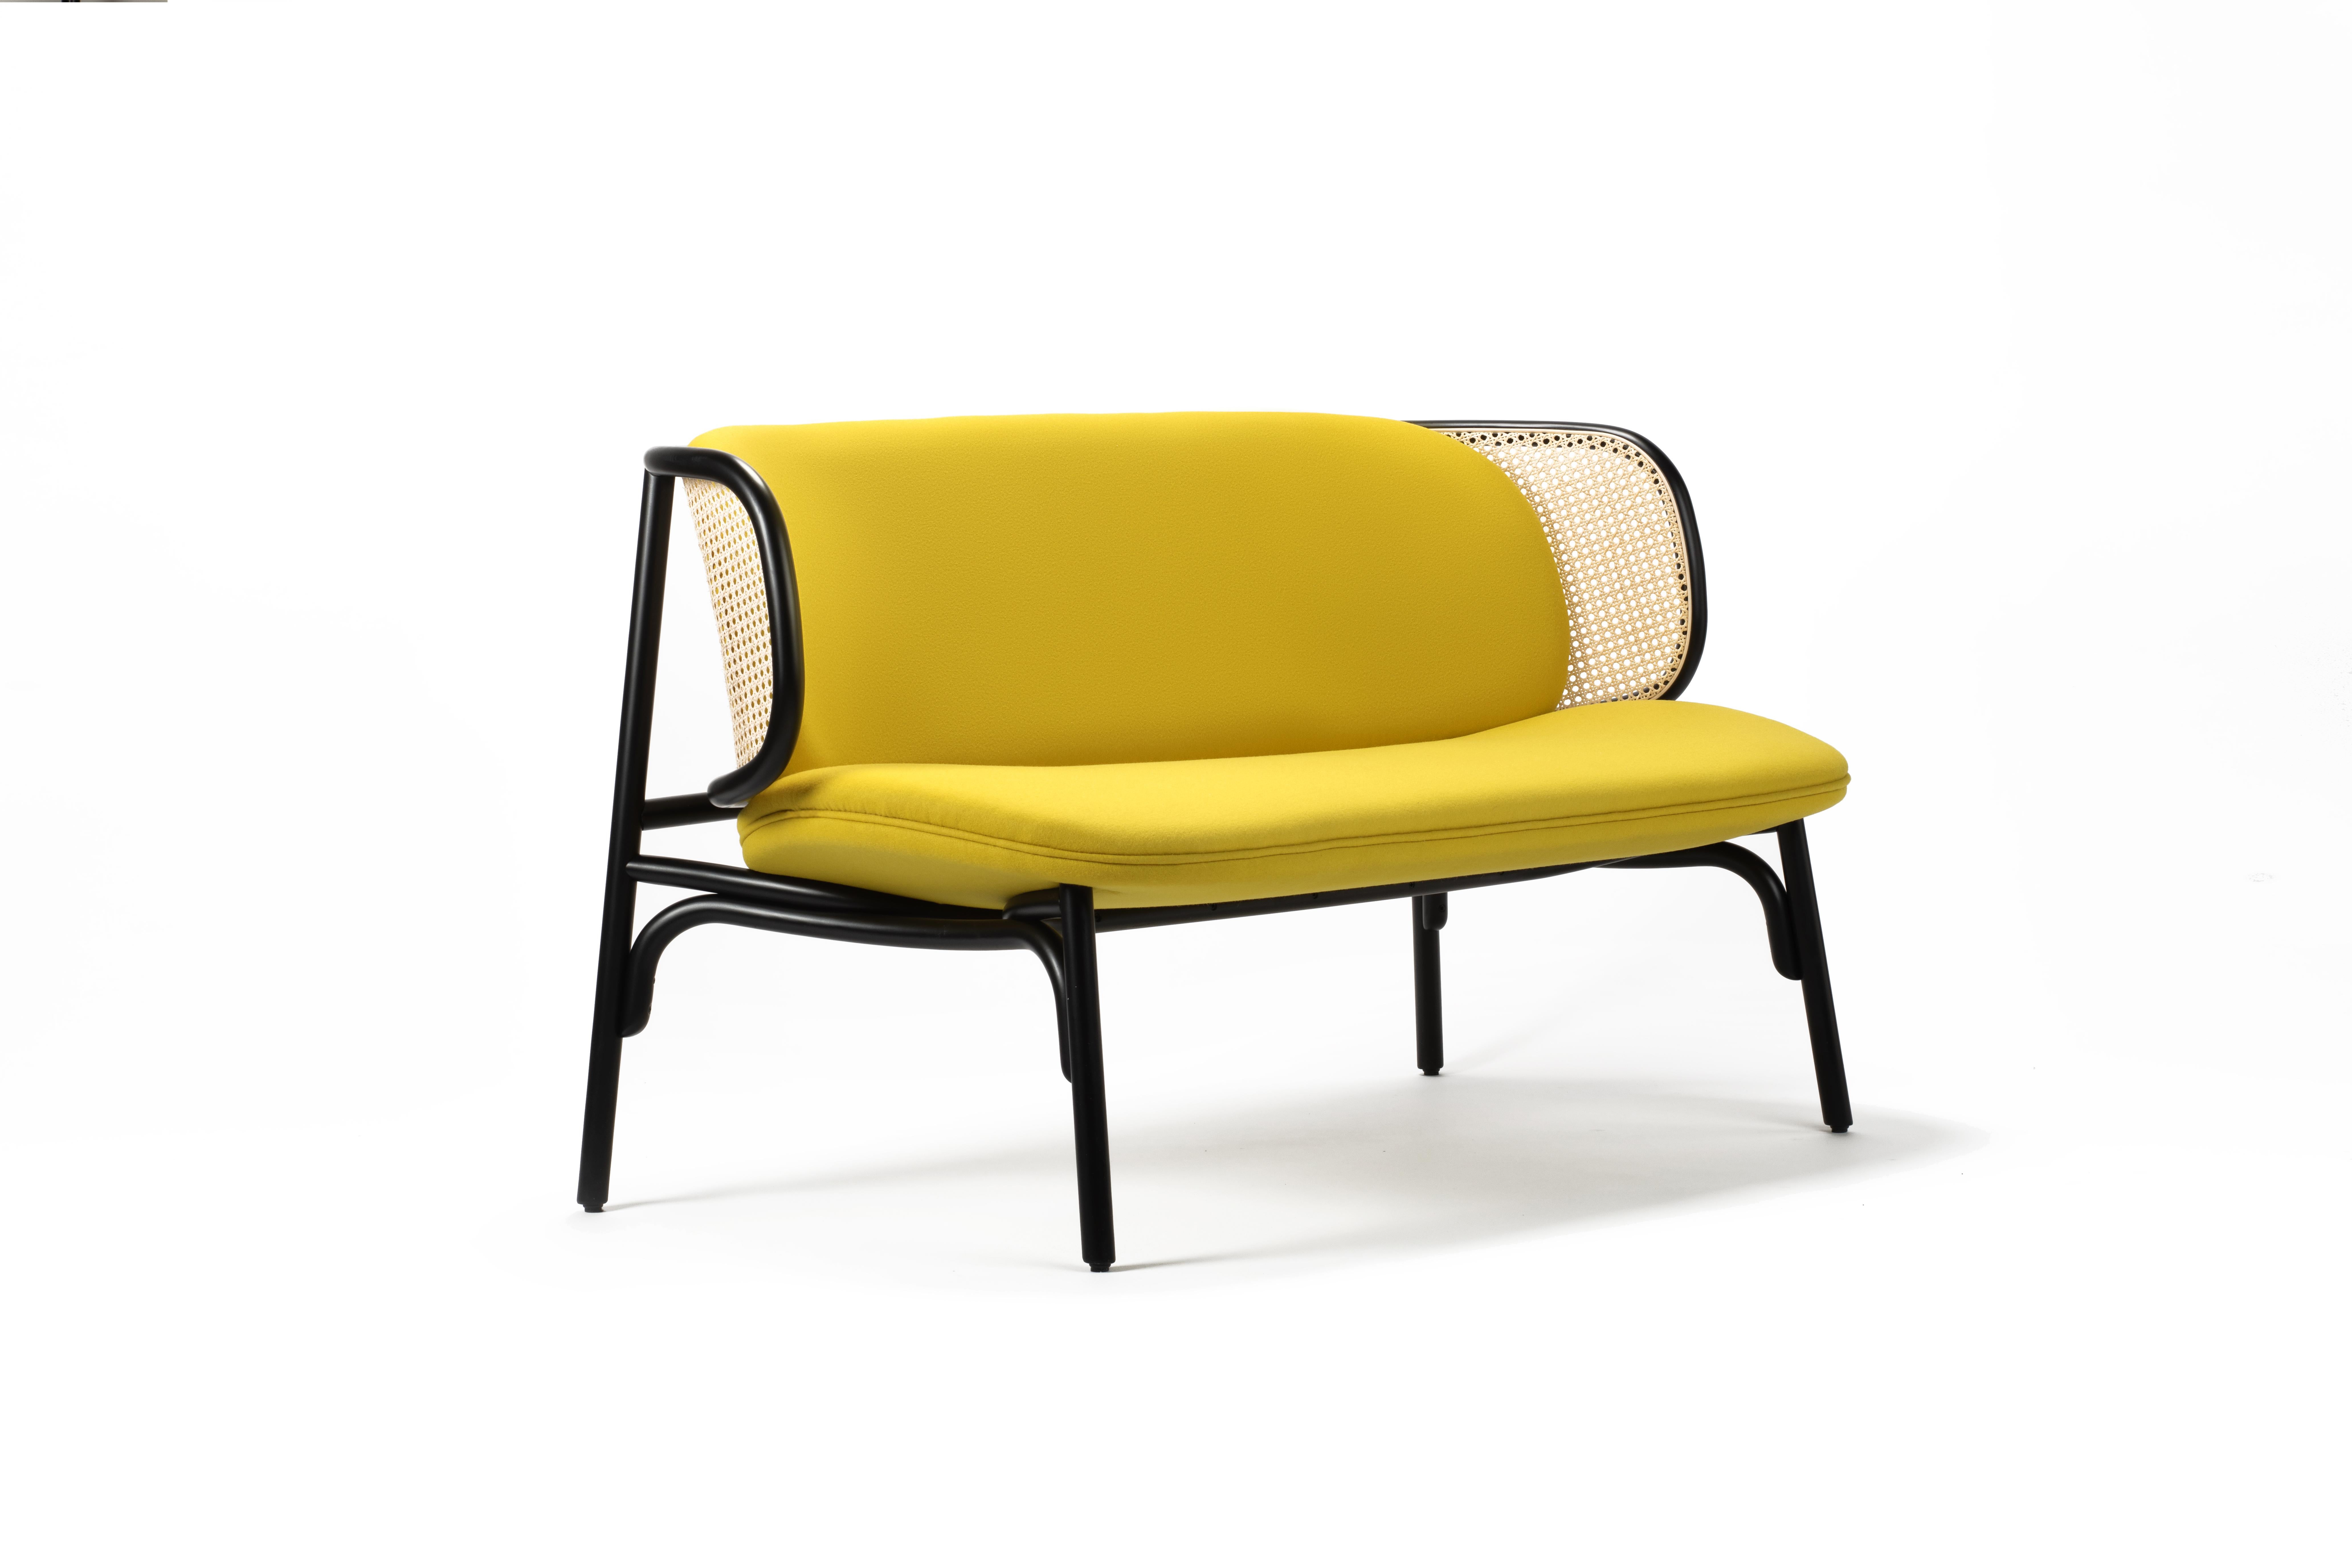 Gebrüder Thonet Vienna reconfirms the collaboration with Chiara Andreatti with the new SUZENNE SOFA, a two-seater sofa that incorporates the aesthetic characteristics of the lounge chair with the same name. A project with a contemporary spirit,